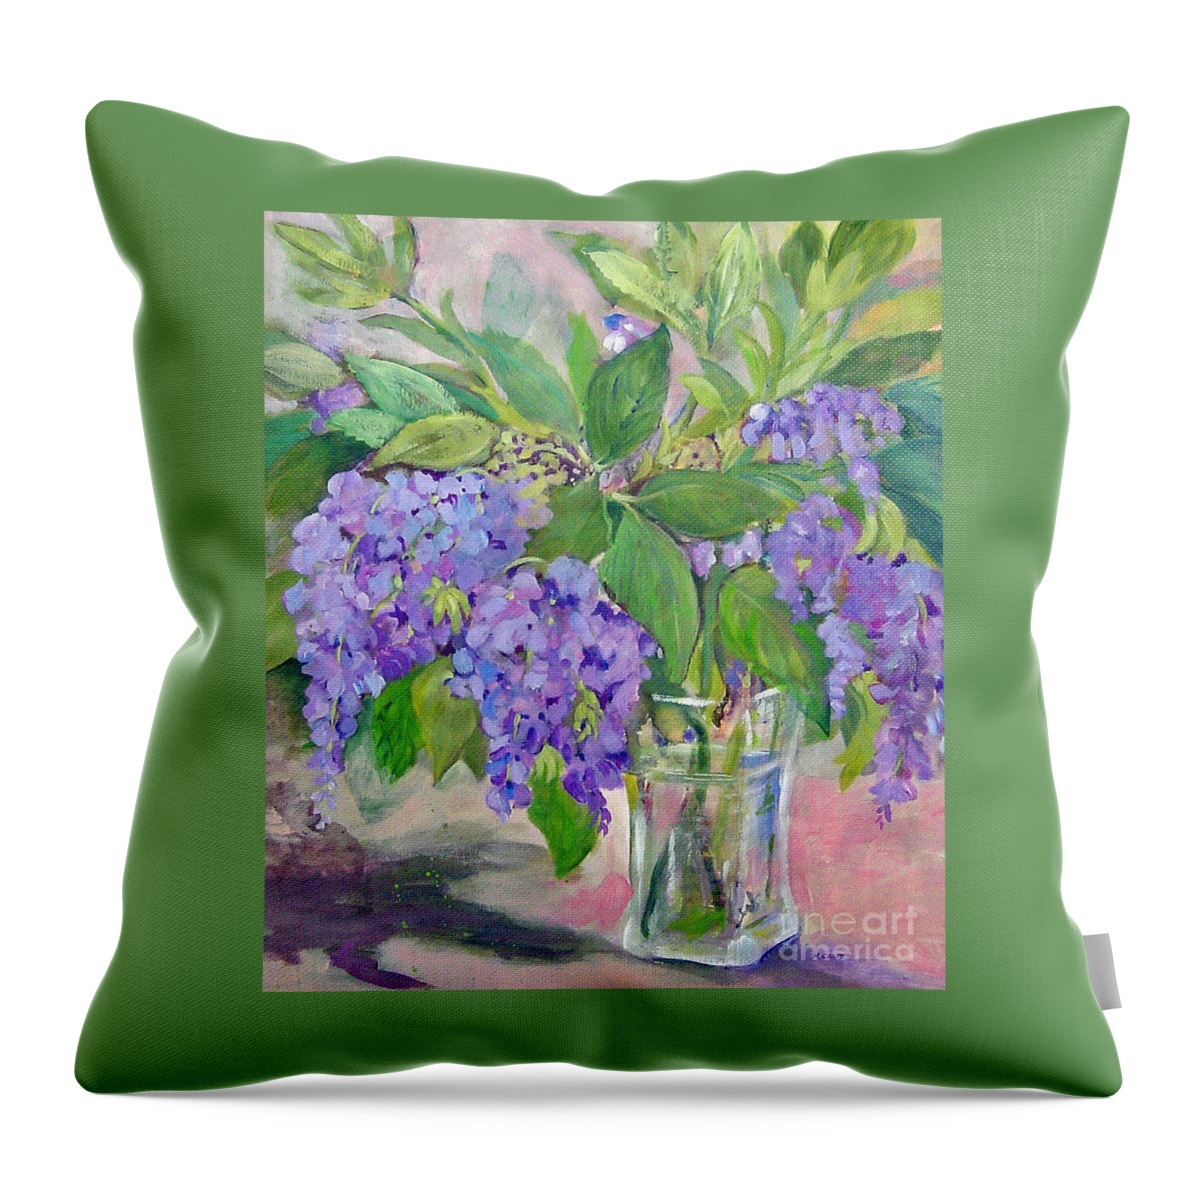 Floweres Throw Pillow featuring the painting Wisteria by Mafalda Cento